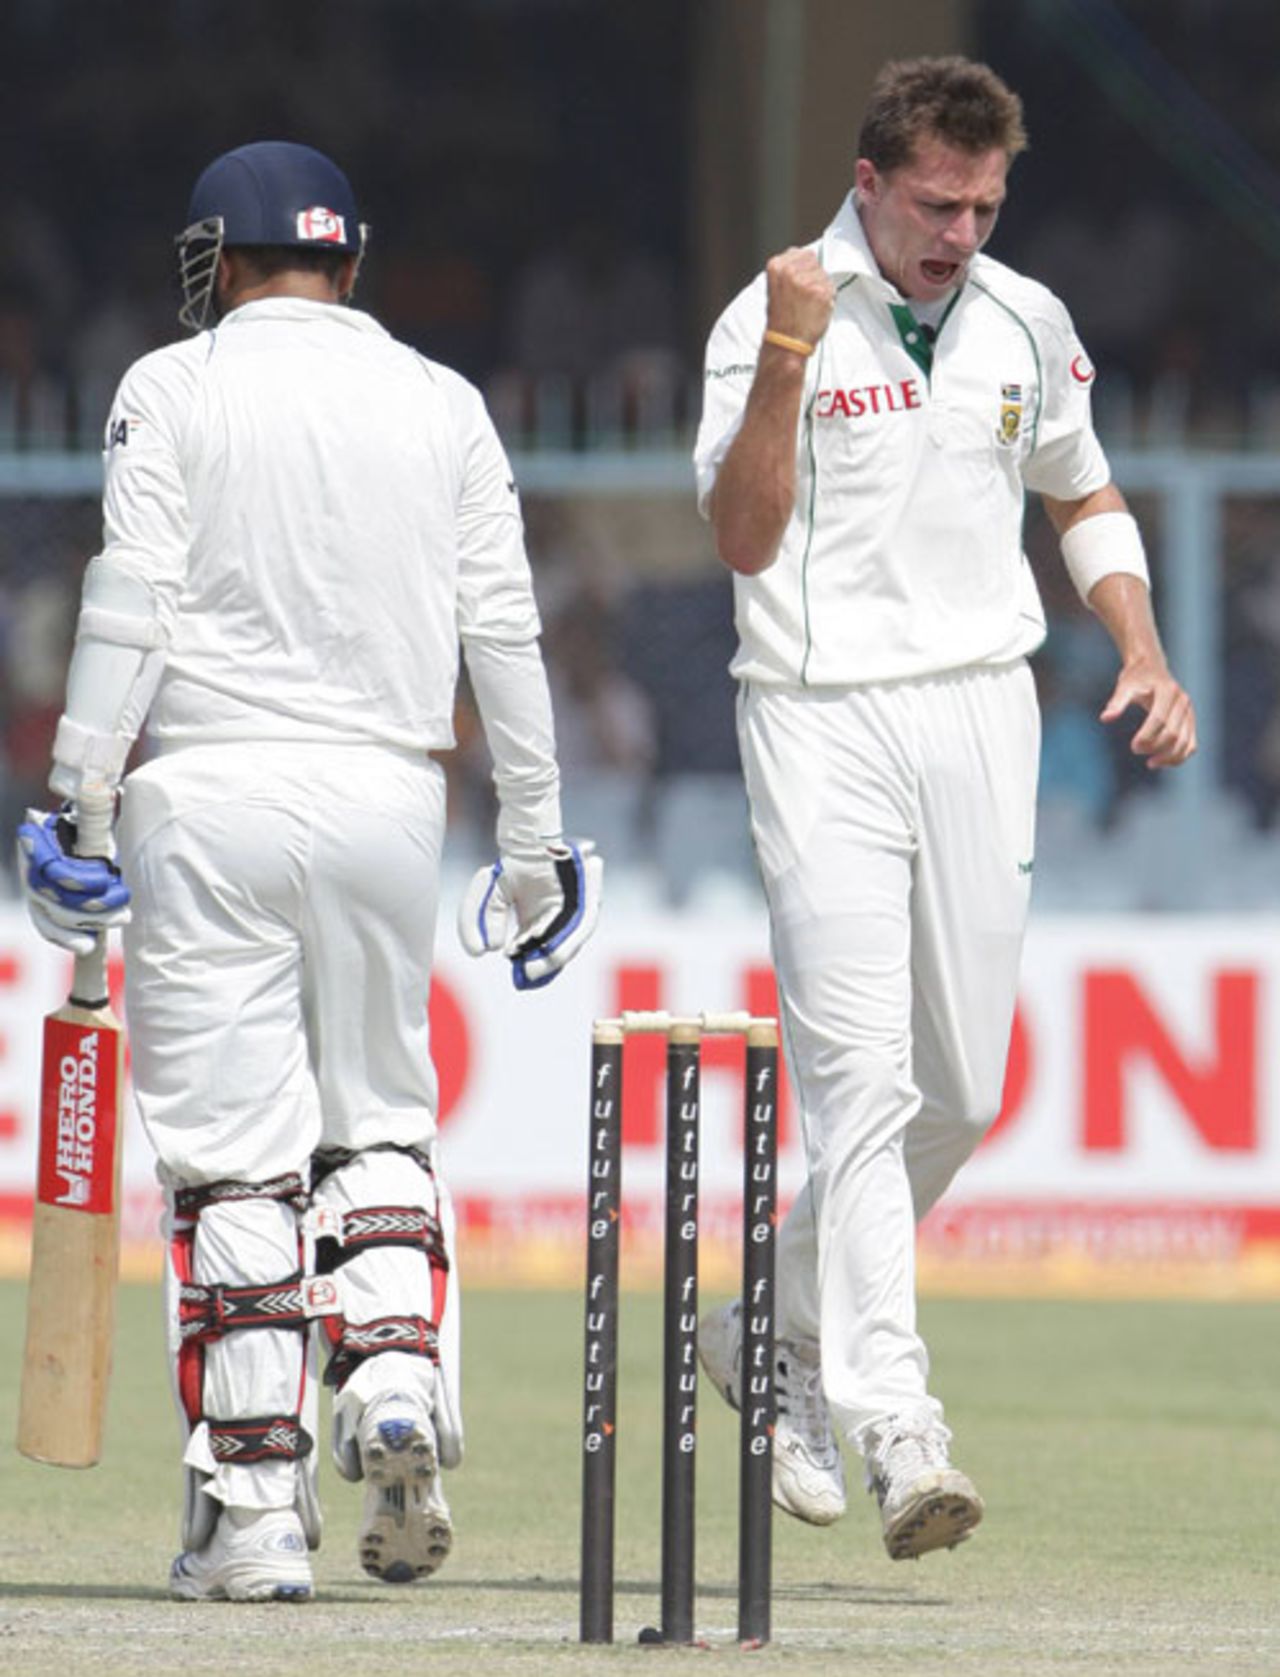 Dale Steyn removes Virender Sehwag early, India v South Africa, 3rd Test, Kanpur, 2nd day, April 12, 2008 